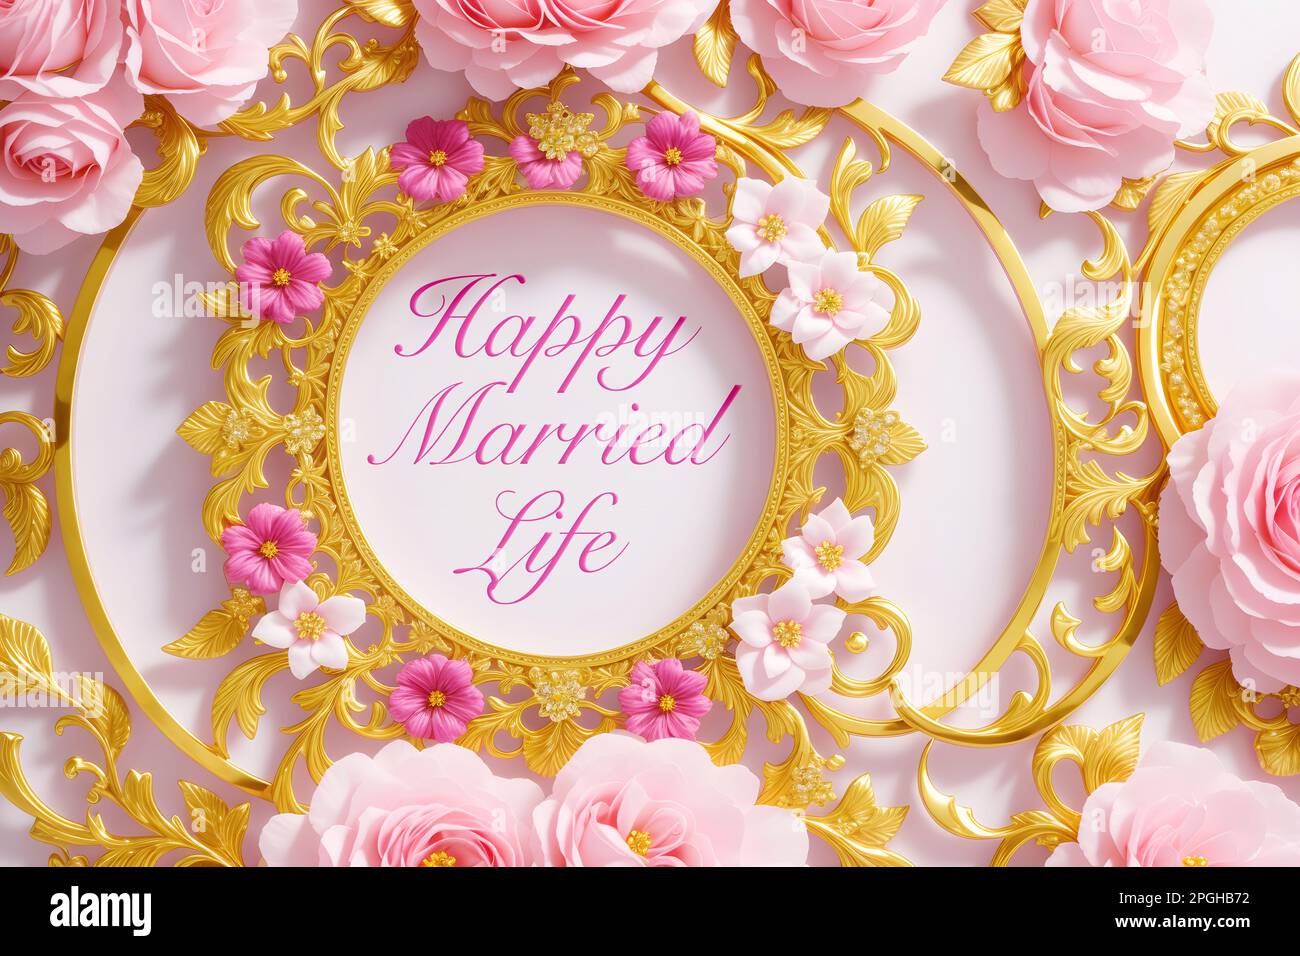 Happy Married Life words inside of golden frame with flowers, on ...